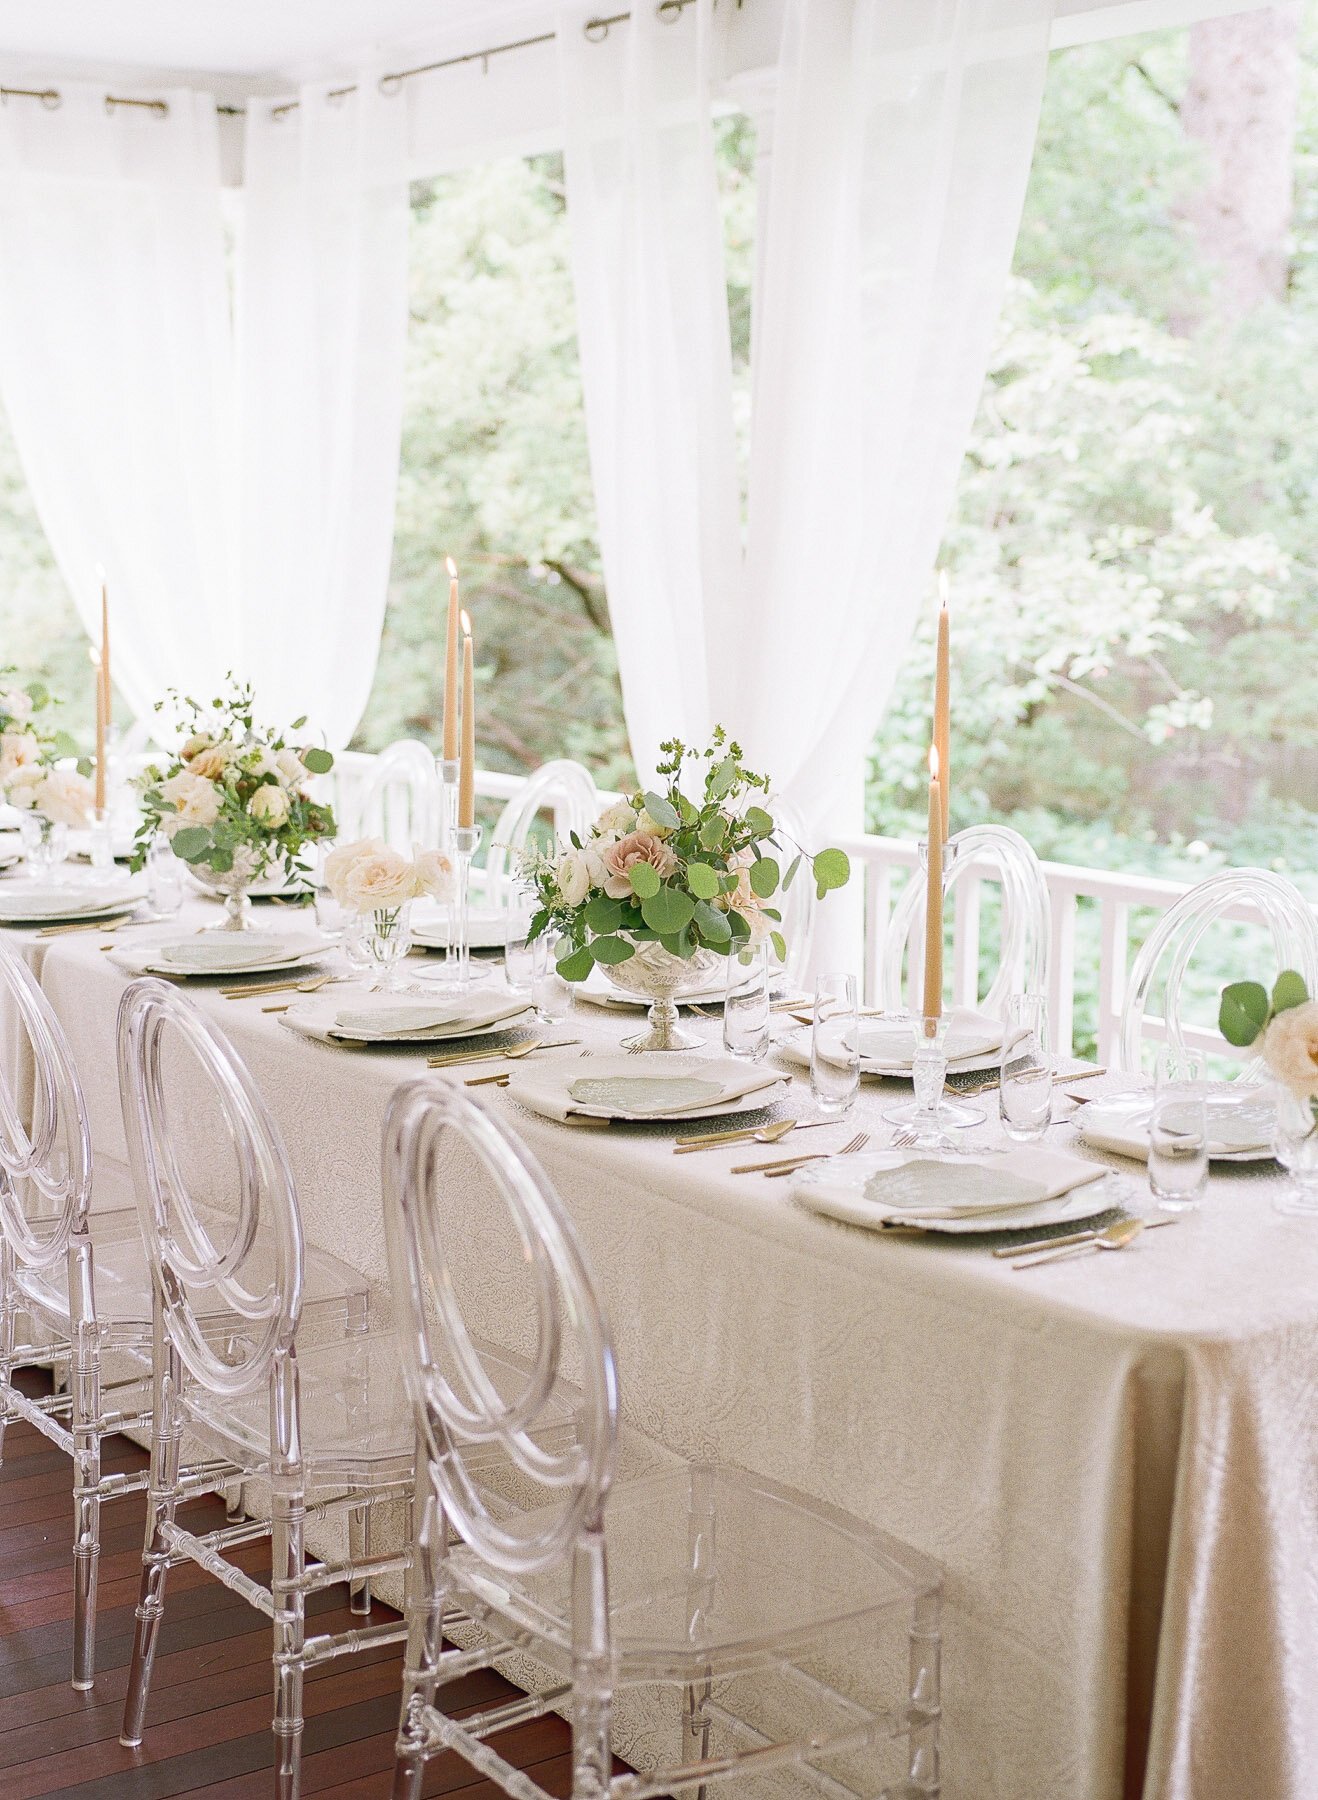 Intimate Backyard wedding in Upstate NY by Kelly Strong Events